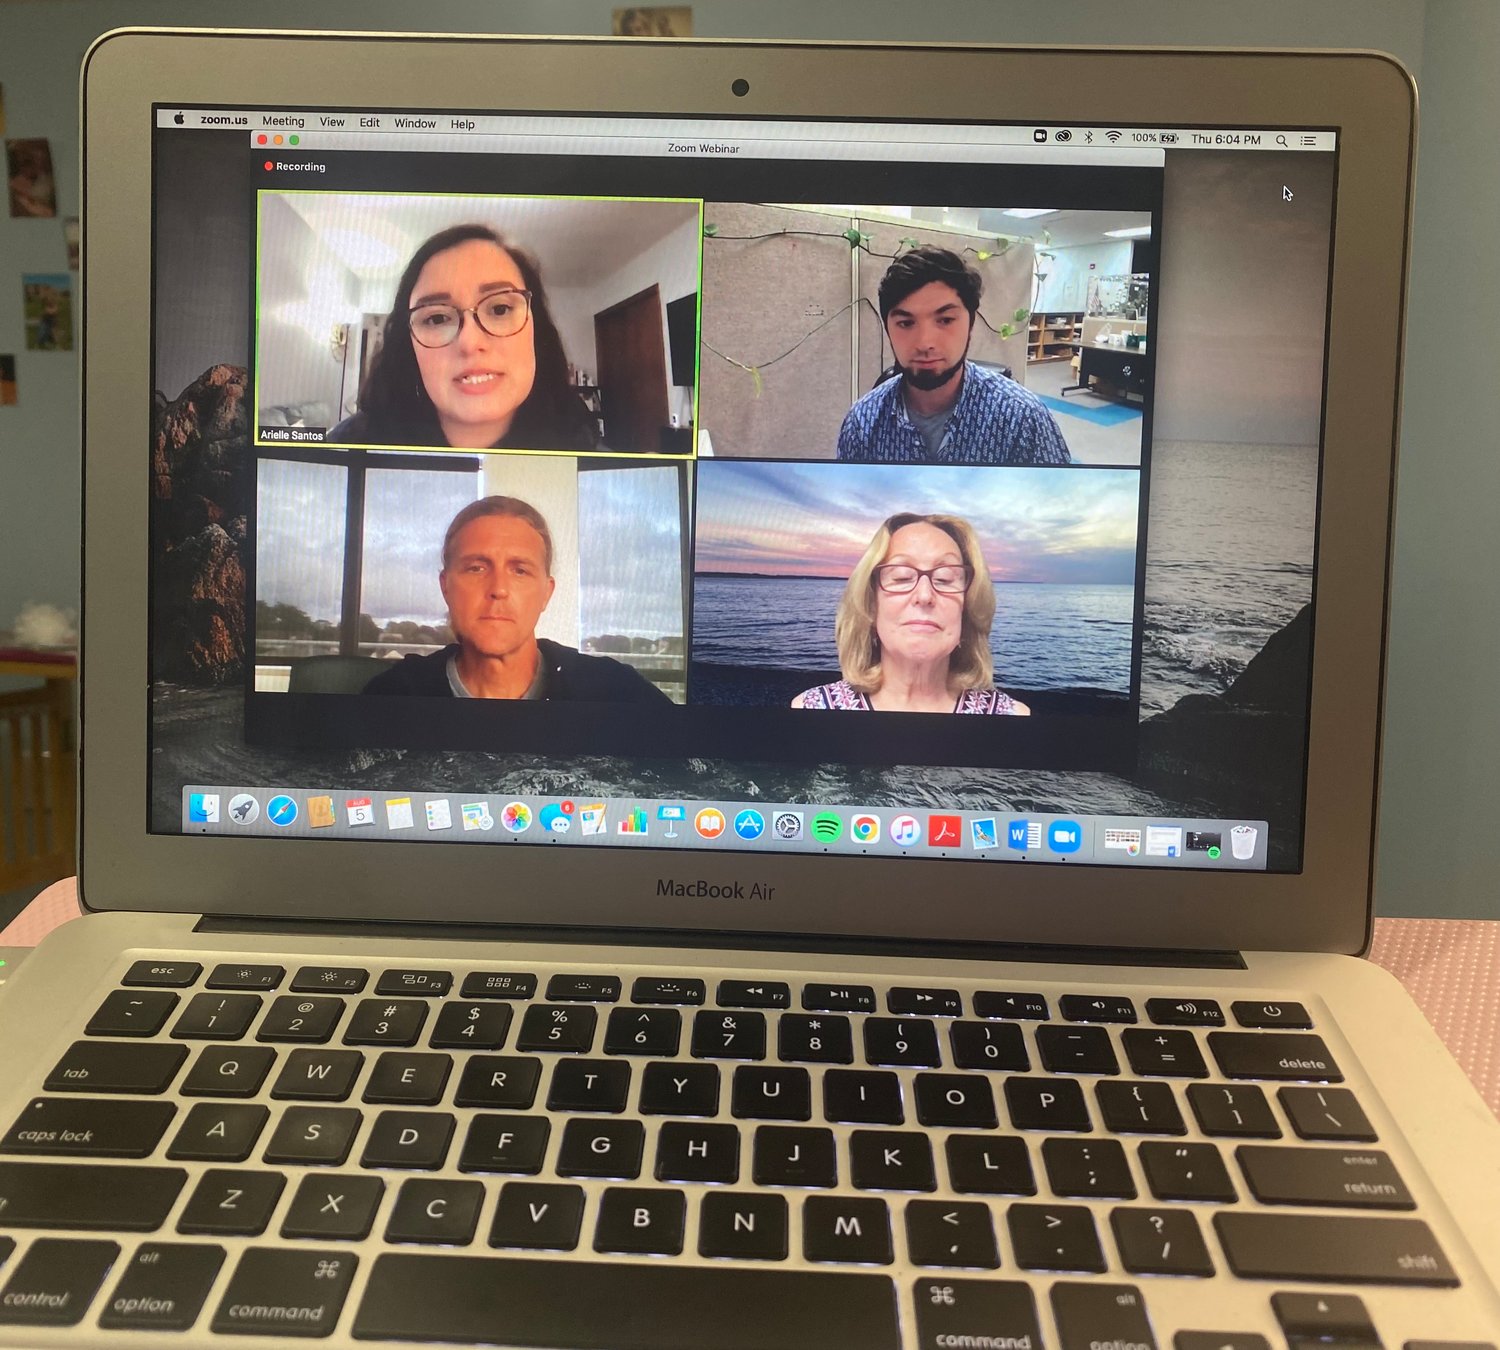 Arielle Santos (top left) leads the Restaurants to Restoration Zoom webinar on National Oyster Day.